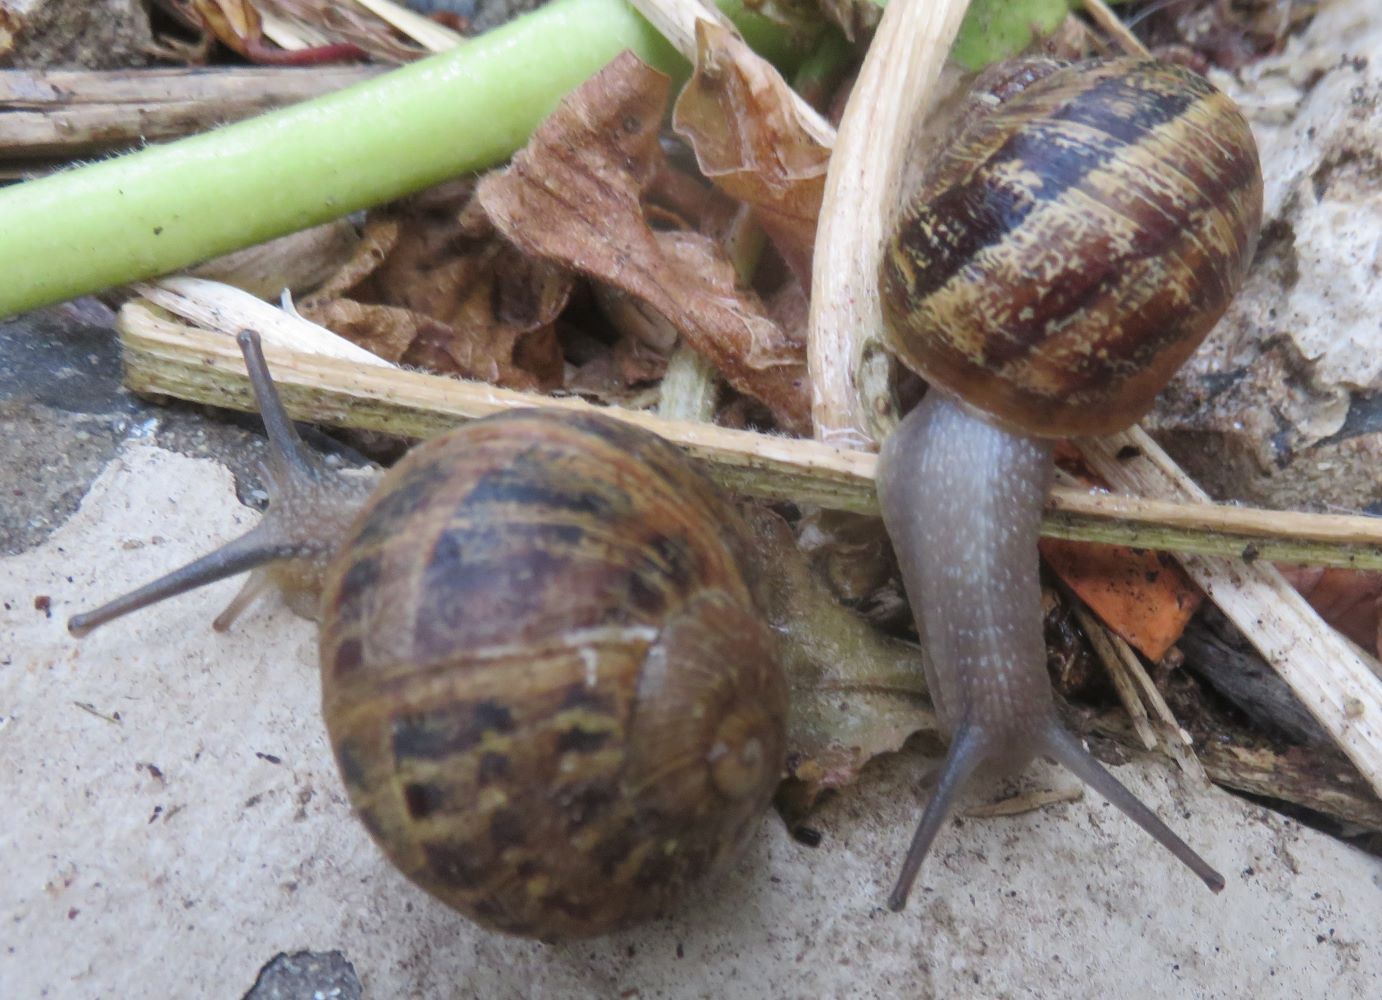 Given snail mating behavior, it may seem that an encounter between any two snails may lead to love.